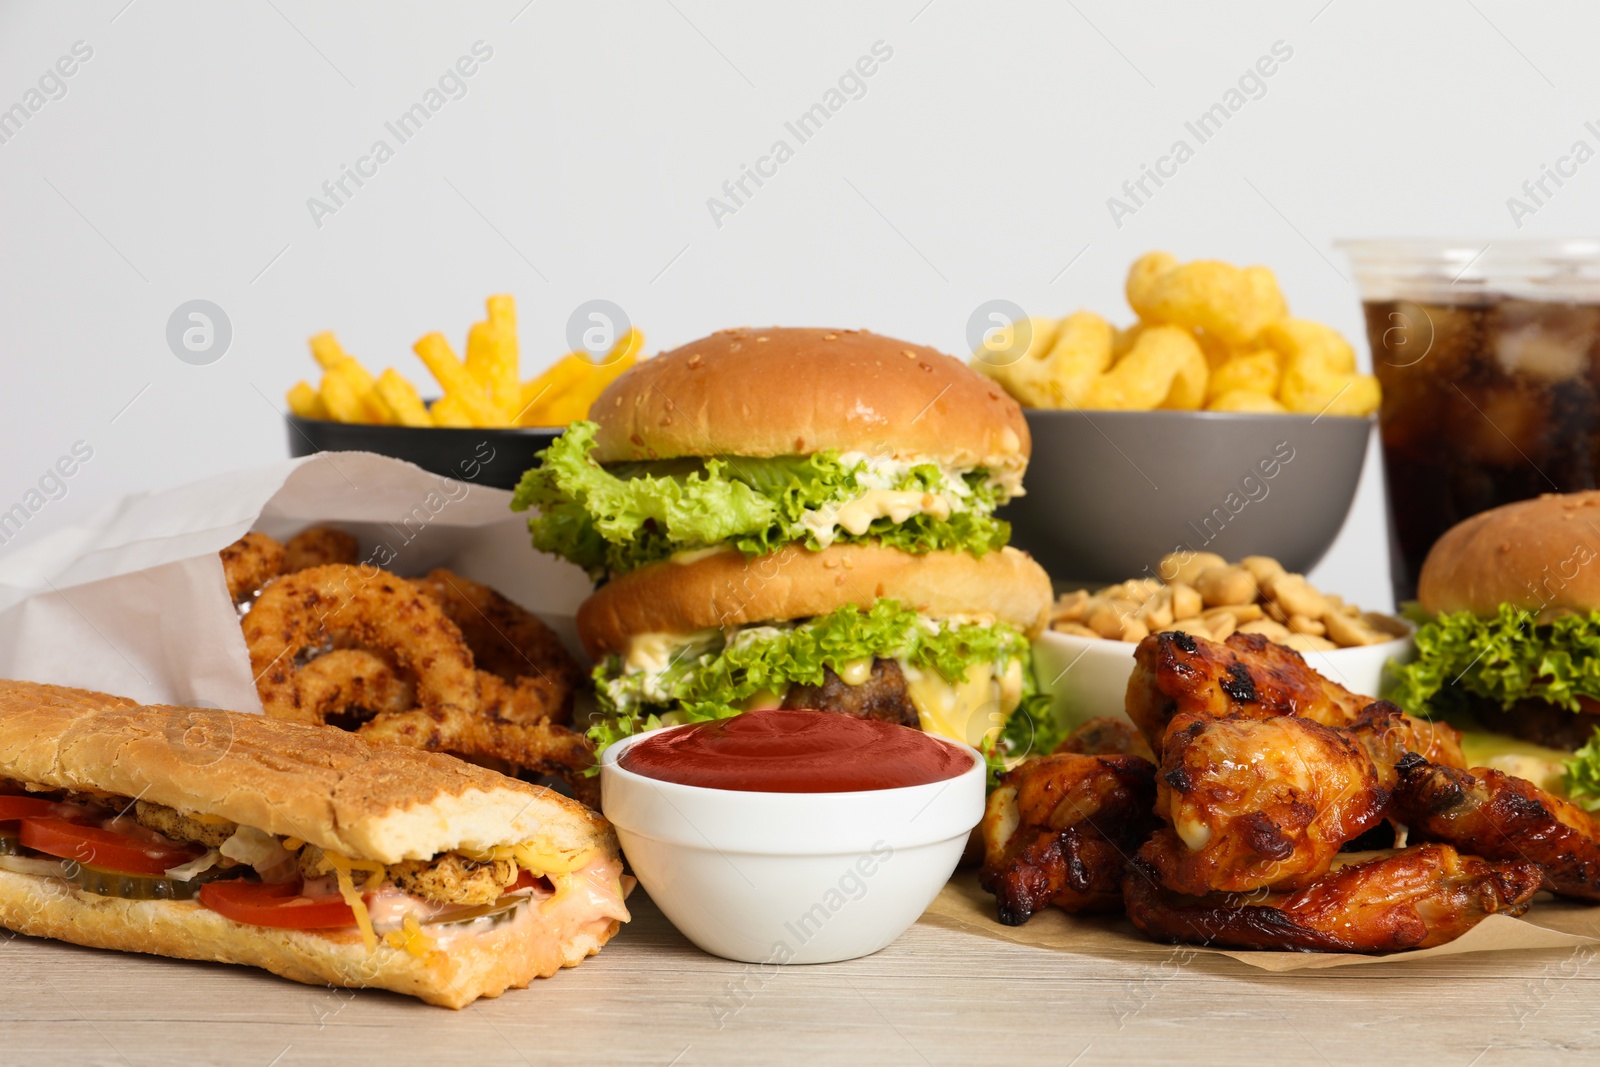 Photo of French fries, burgers and other fast food on wooden table against white background, closeup